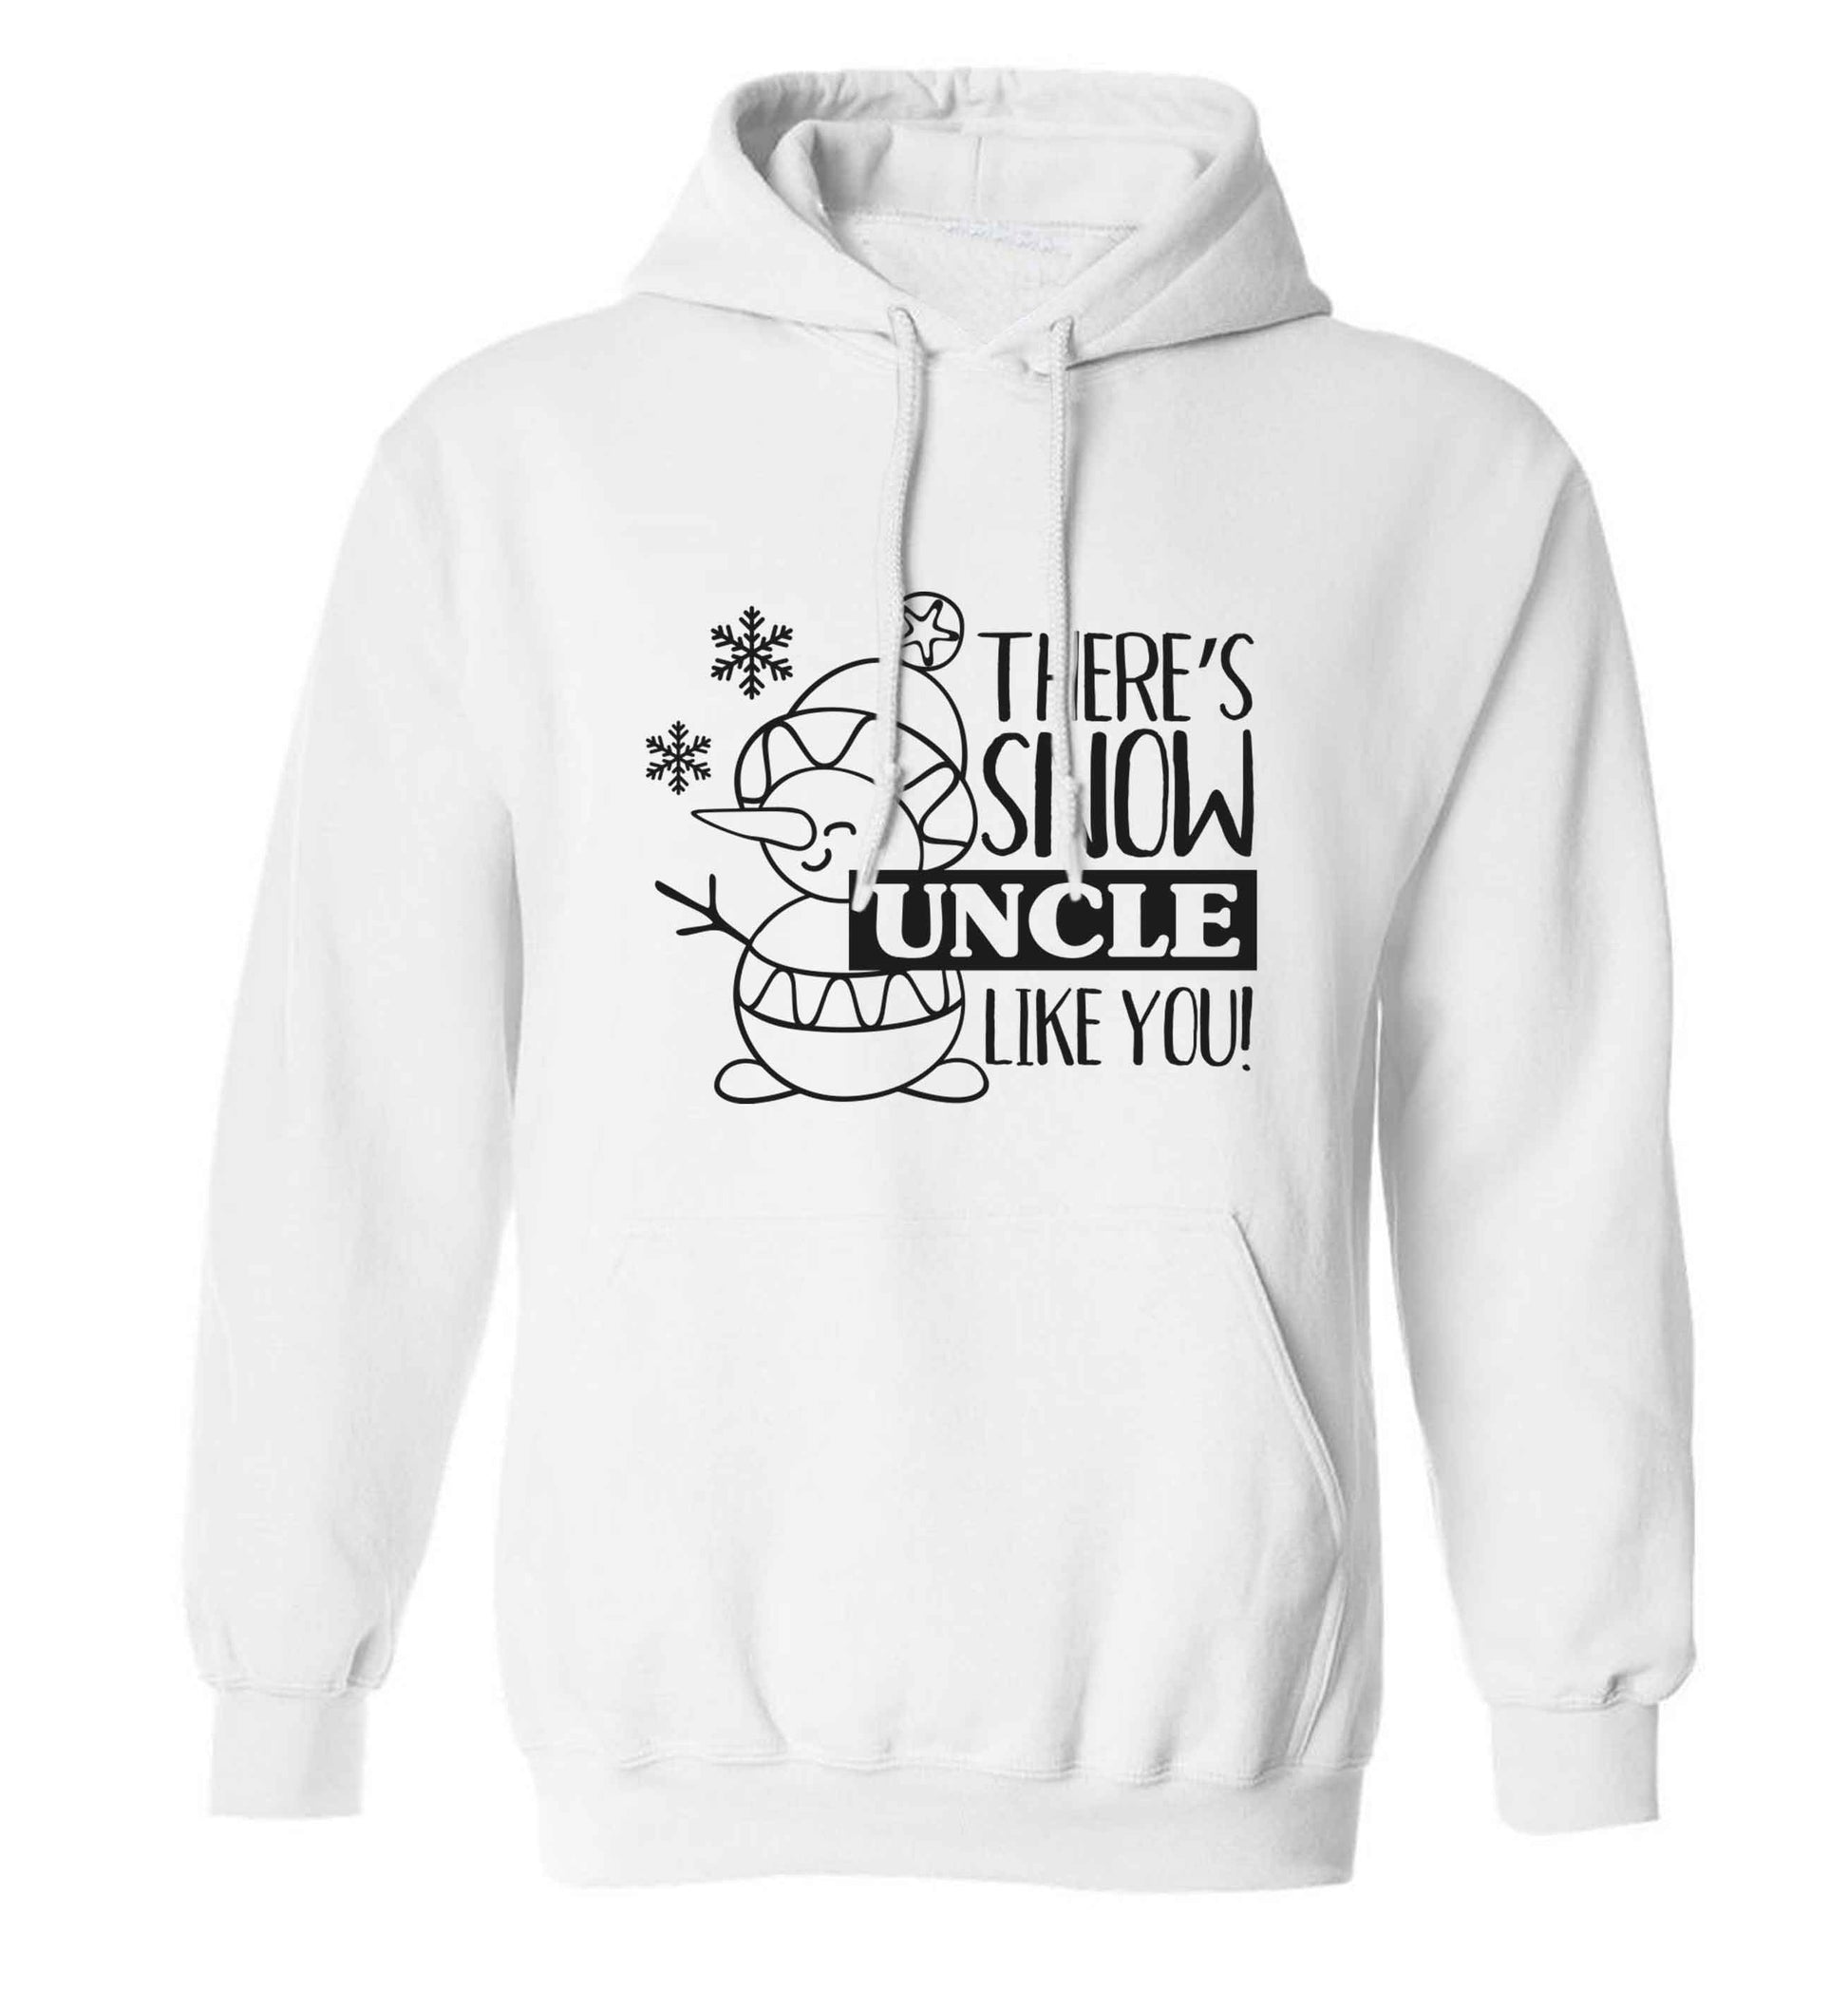 There's snow uncle like you adults unisex white hoodie 2XL